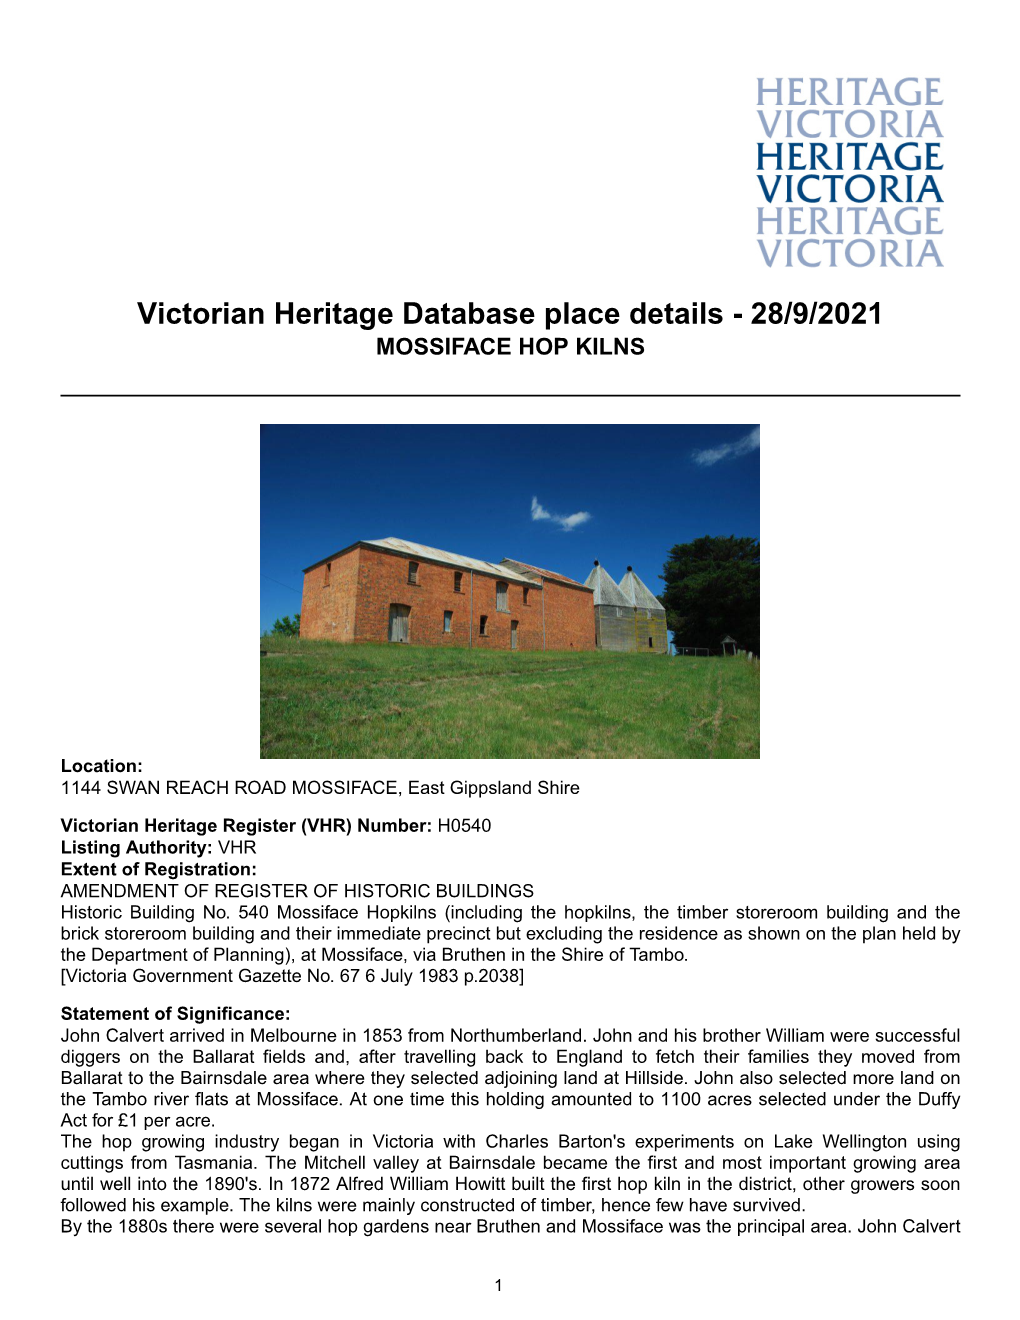 Victorian Heritage Database Place Details - 28/9/2021 MOSSIFACE HOP KILNS